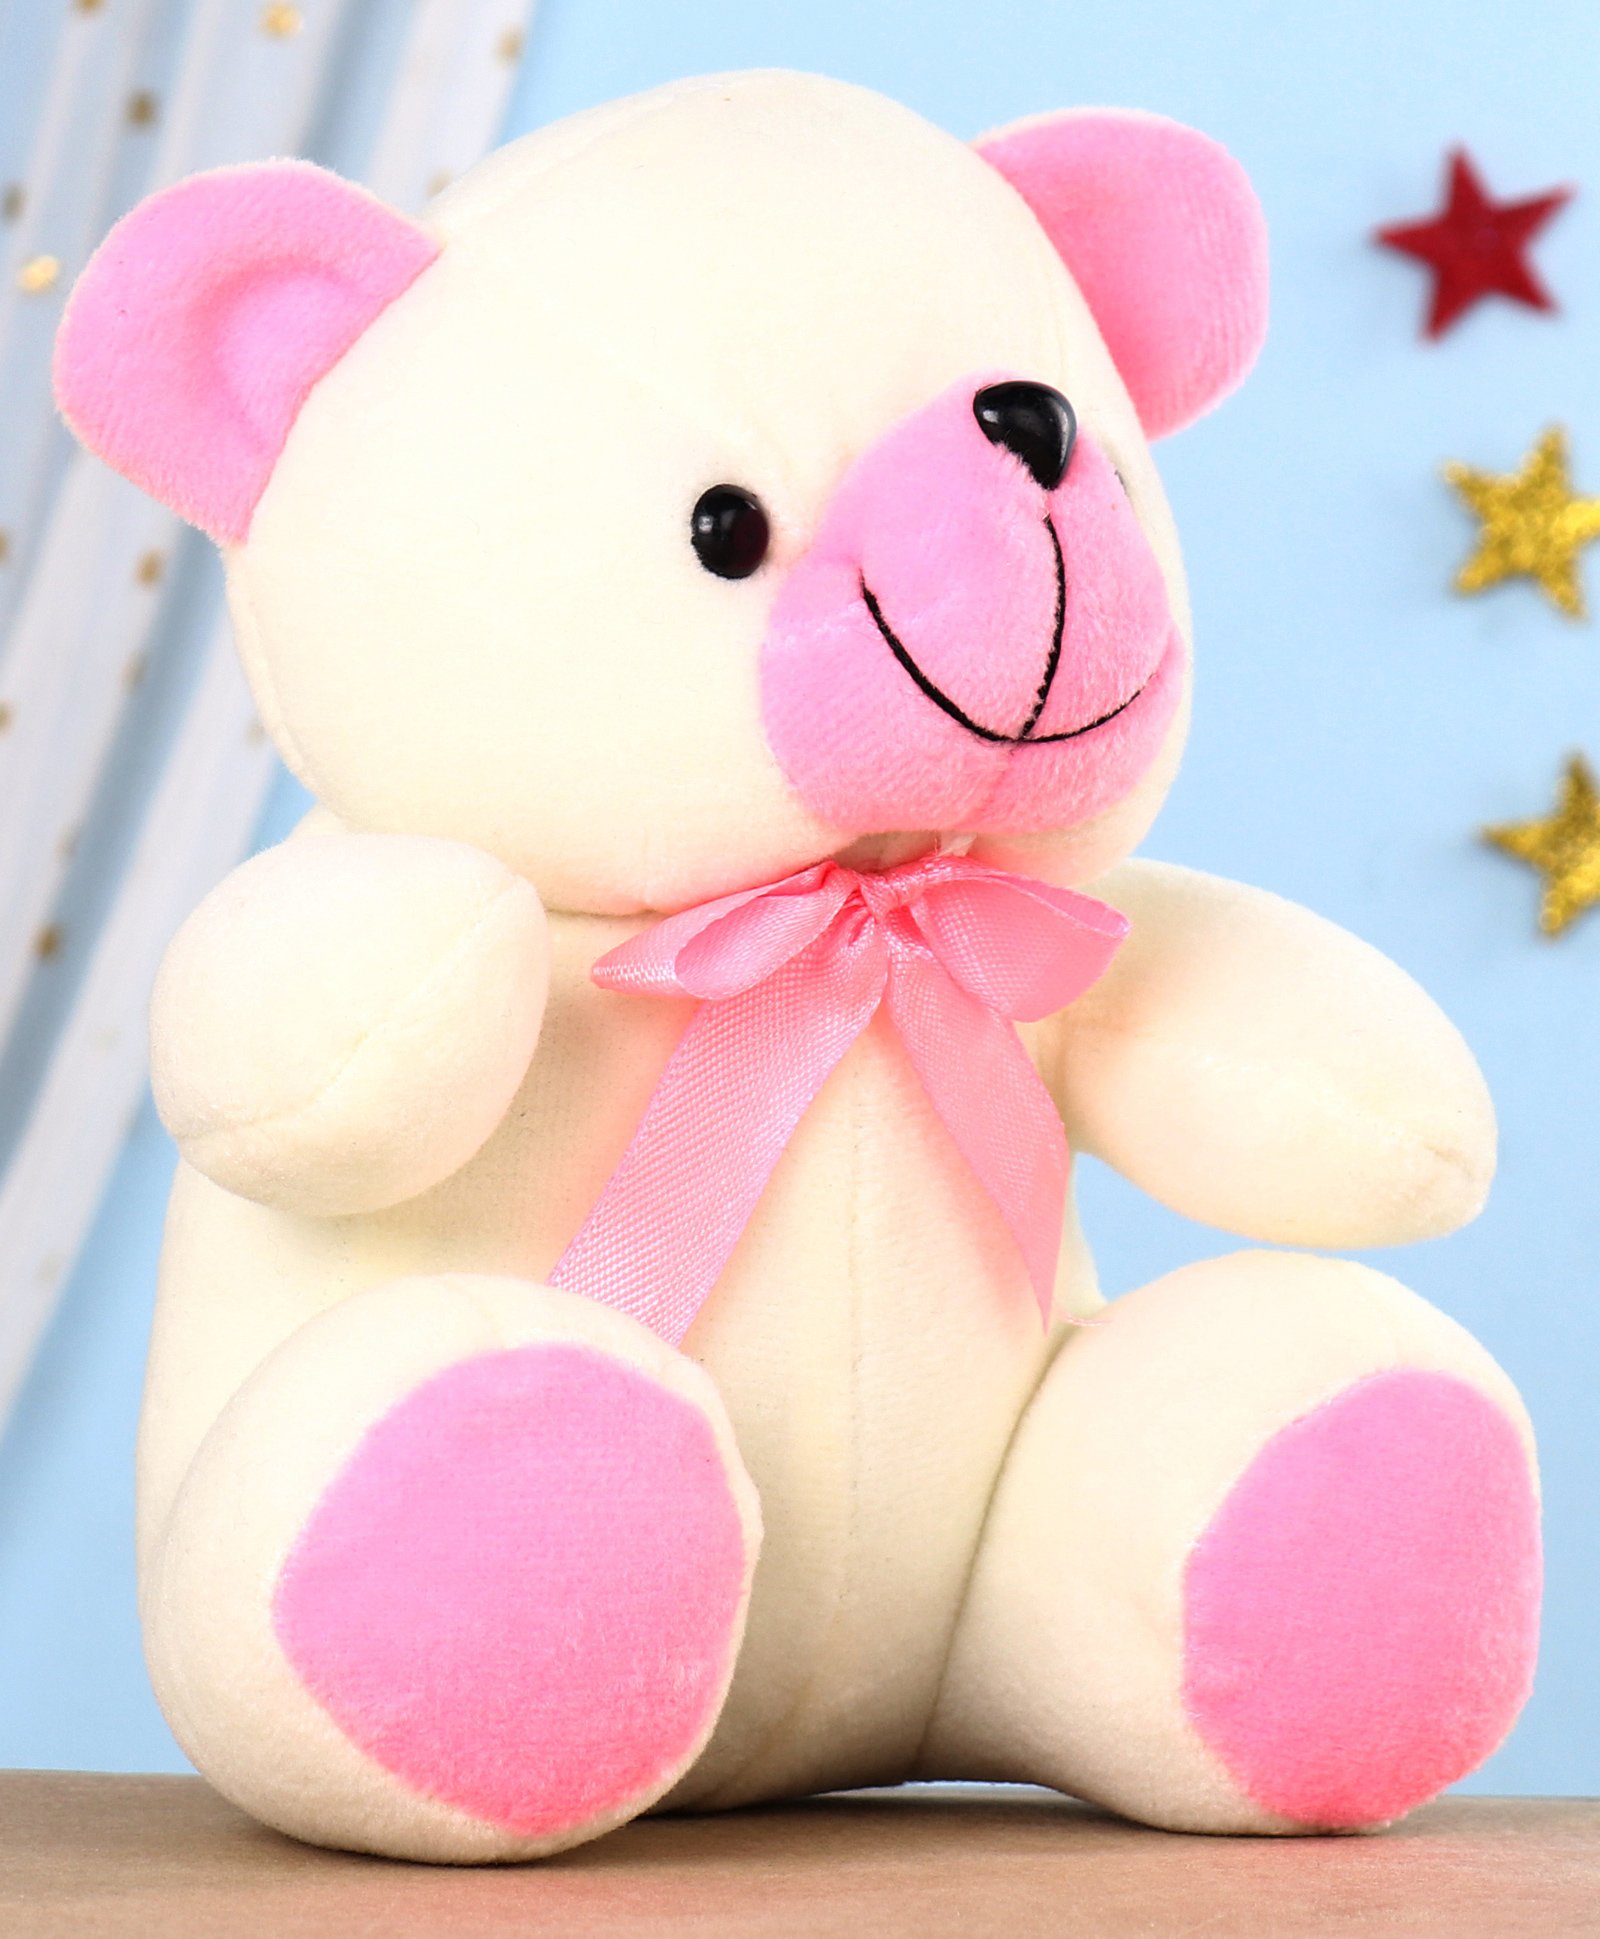 New Baby Girls Teddy Bear  'Little Princess'  Soft Toy Gift Soft Touch Pink 15cm